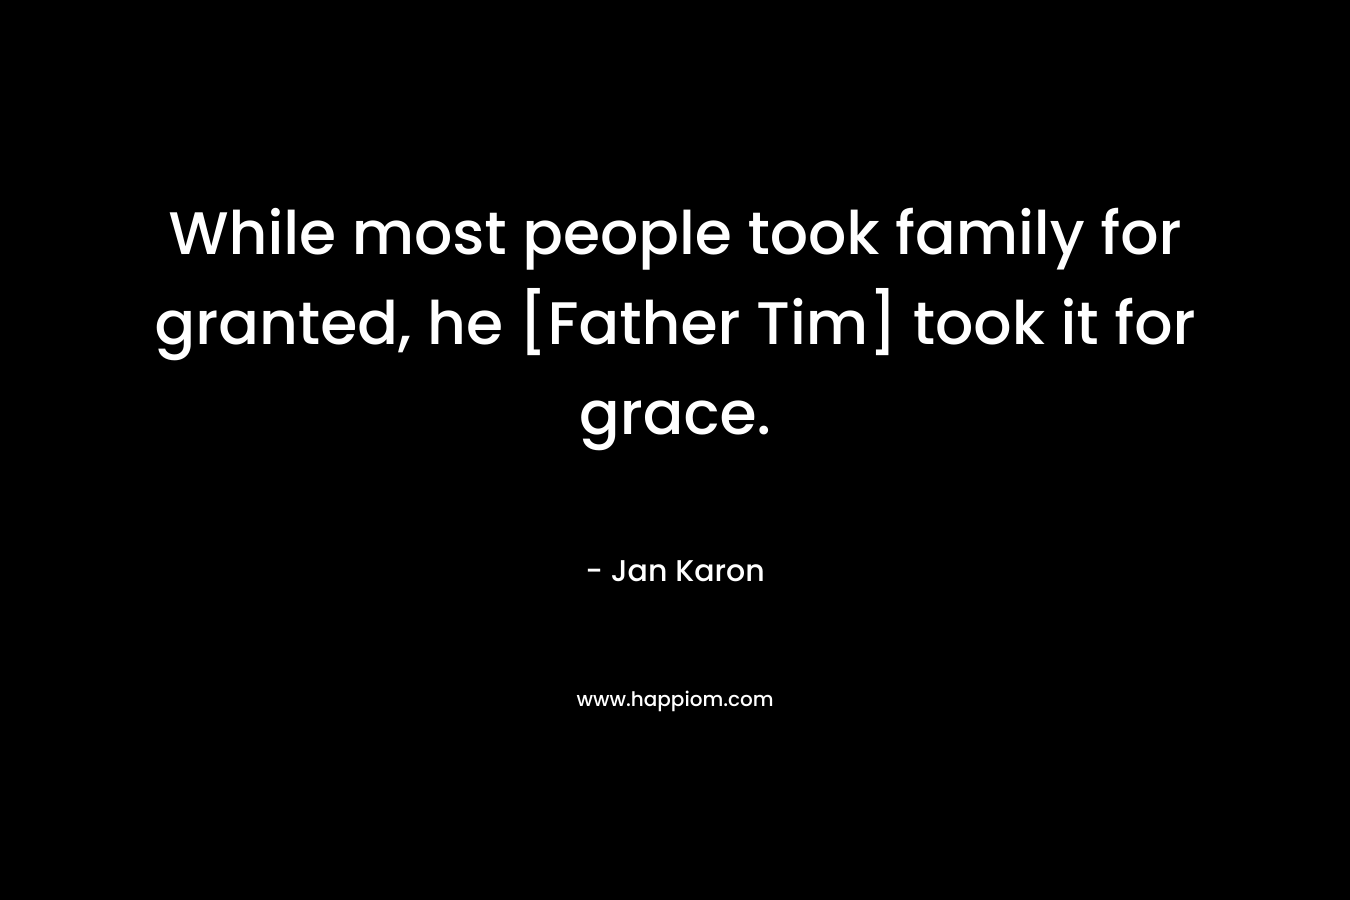 While most people took family for granted, he [Father Tim] took it for grace. – Jan Karon